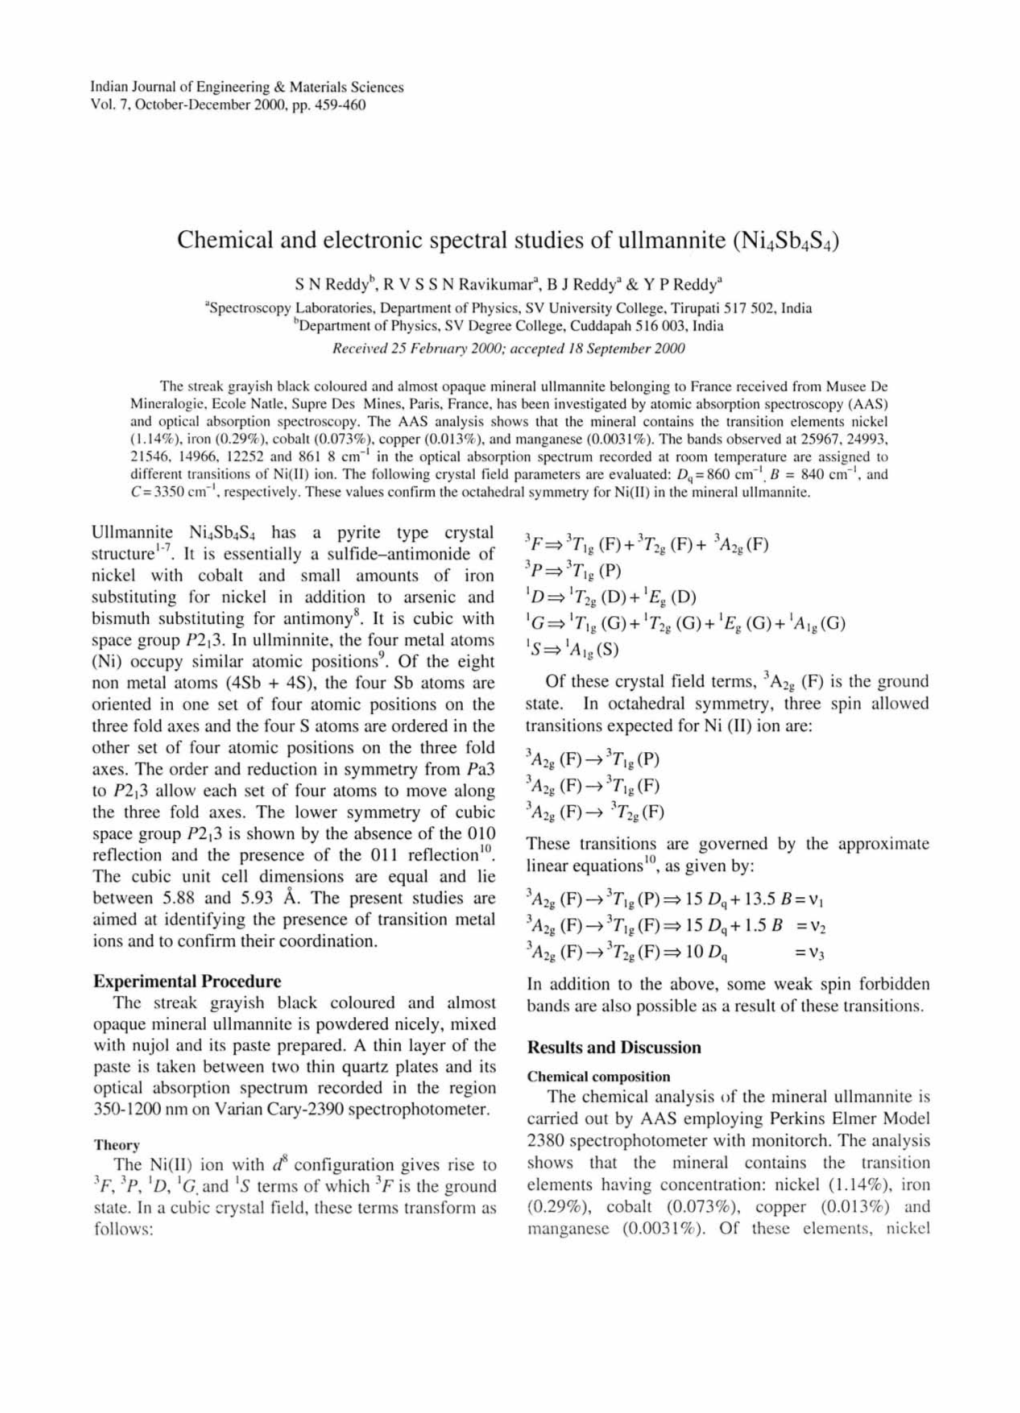 Chemical and Electronic Spectral Studies of Ullmannite (Ni4sb4s4)